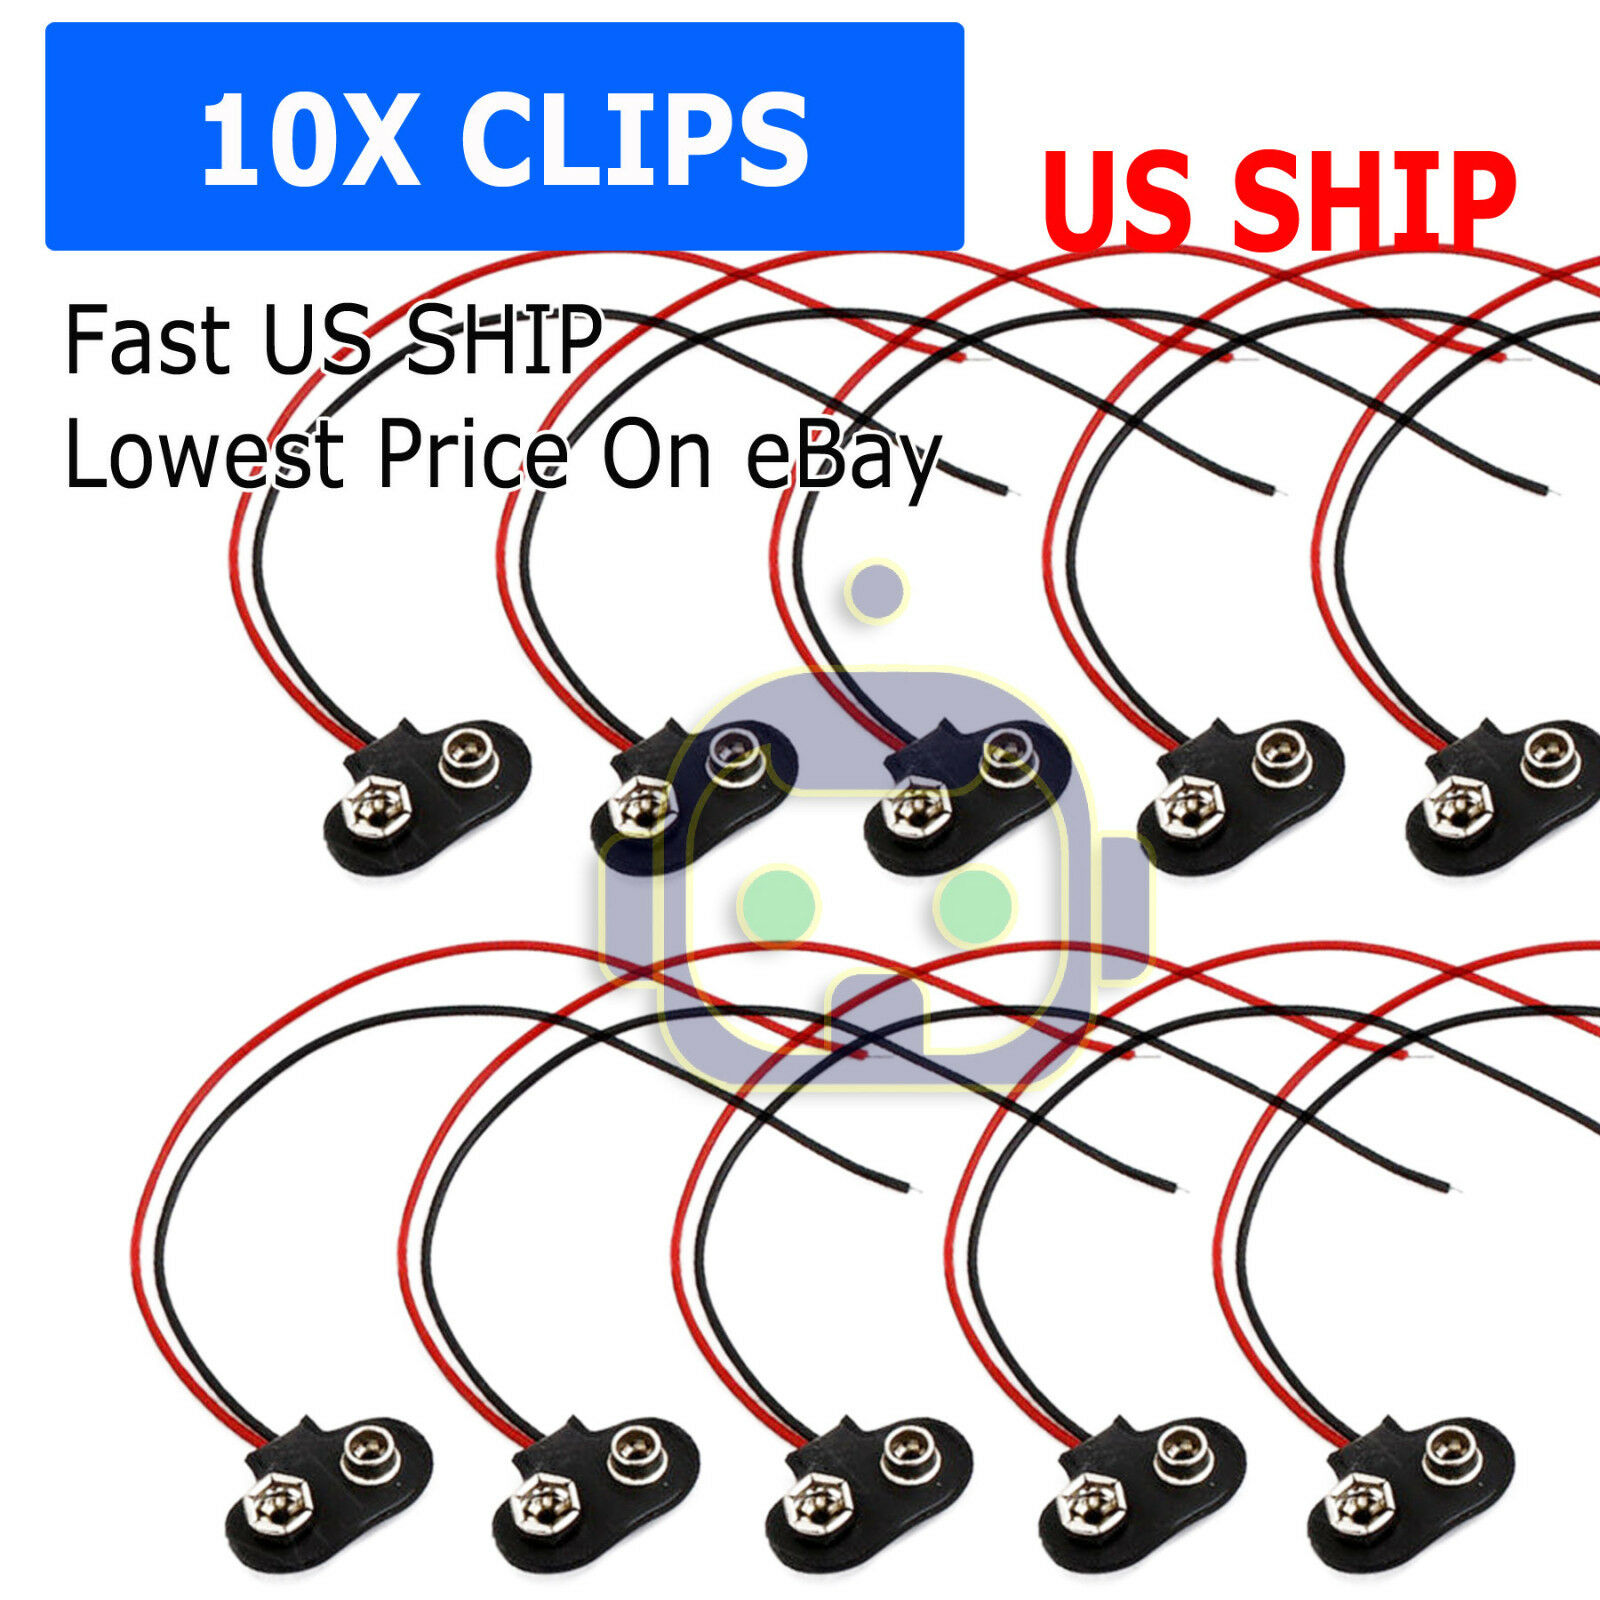 10x 9v 12cm Battery Connector T Type Clip Plug Wire Cord Leads 9 Volt